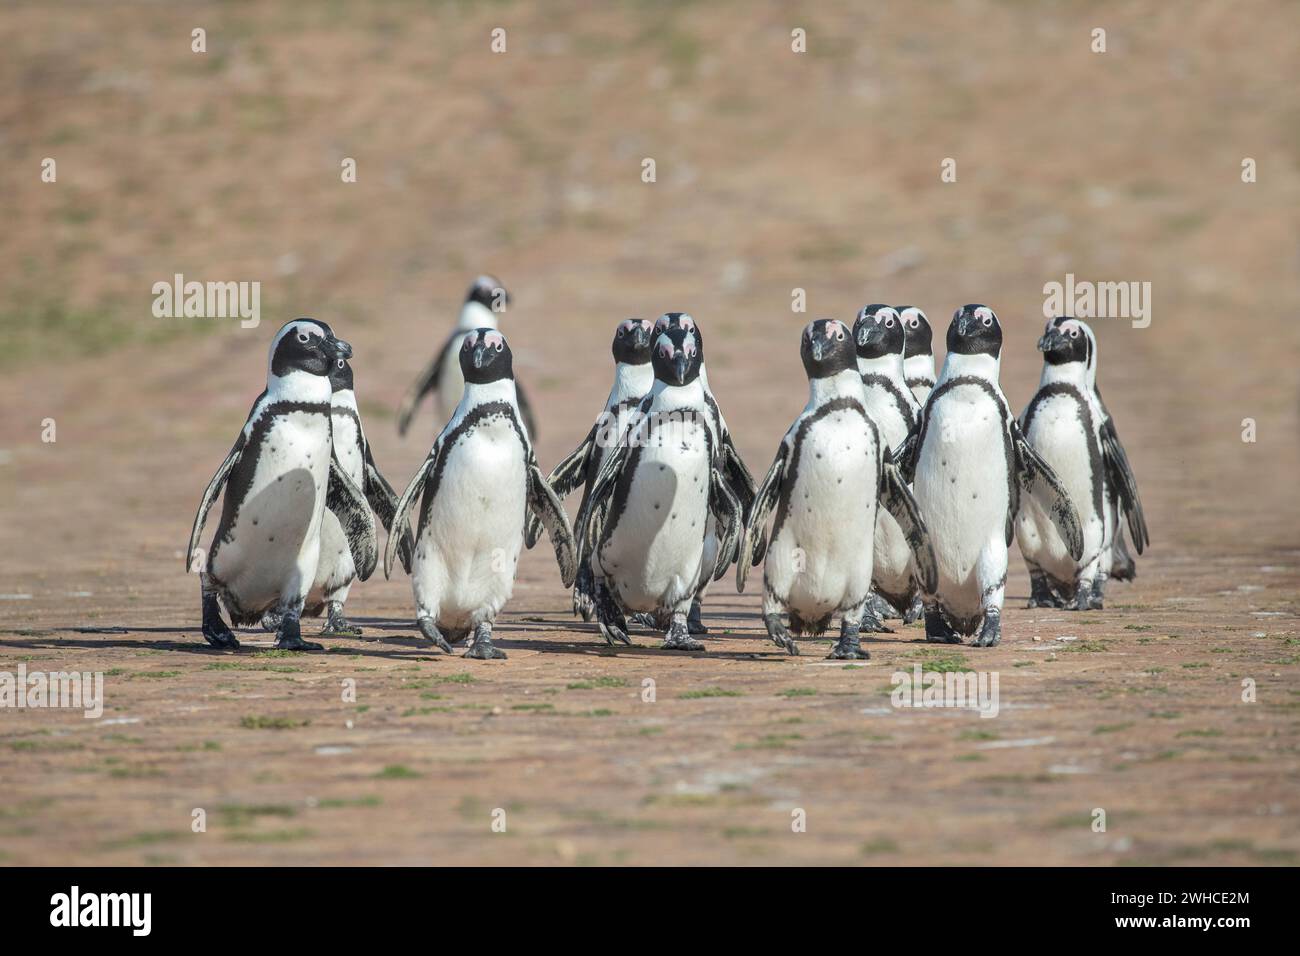 Africa, African Penguins, Spheniscus demersus, endangered species, IUCN Red List, Overberg, Seabird, South Africa, Stony Point Nature Reserve, Western Cape Province, Stoney Point Nature Reserve, Overstrand Stock Photo